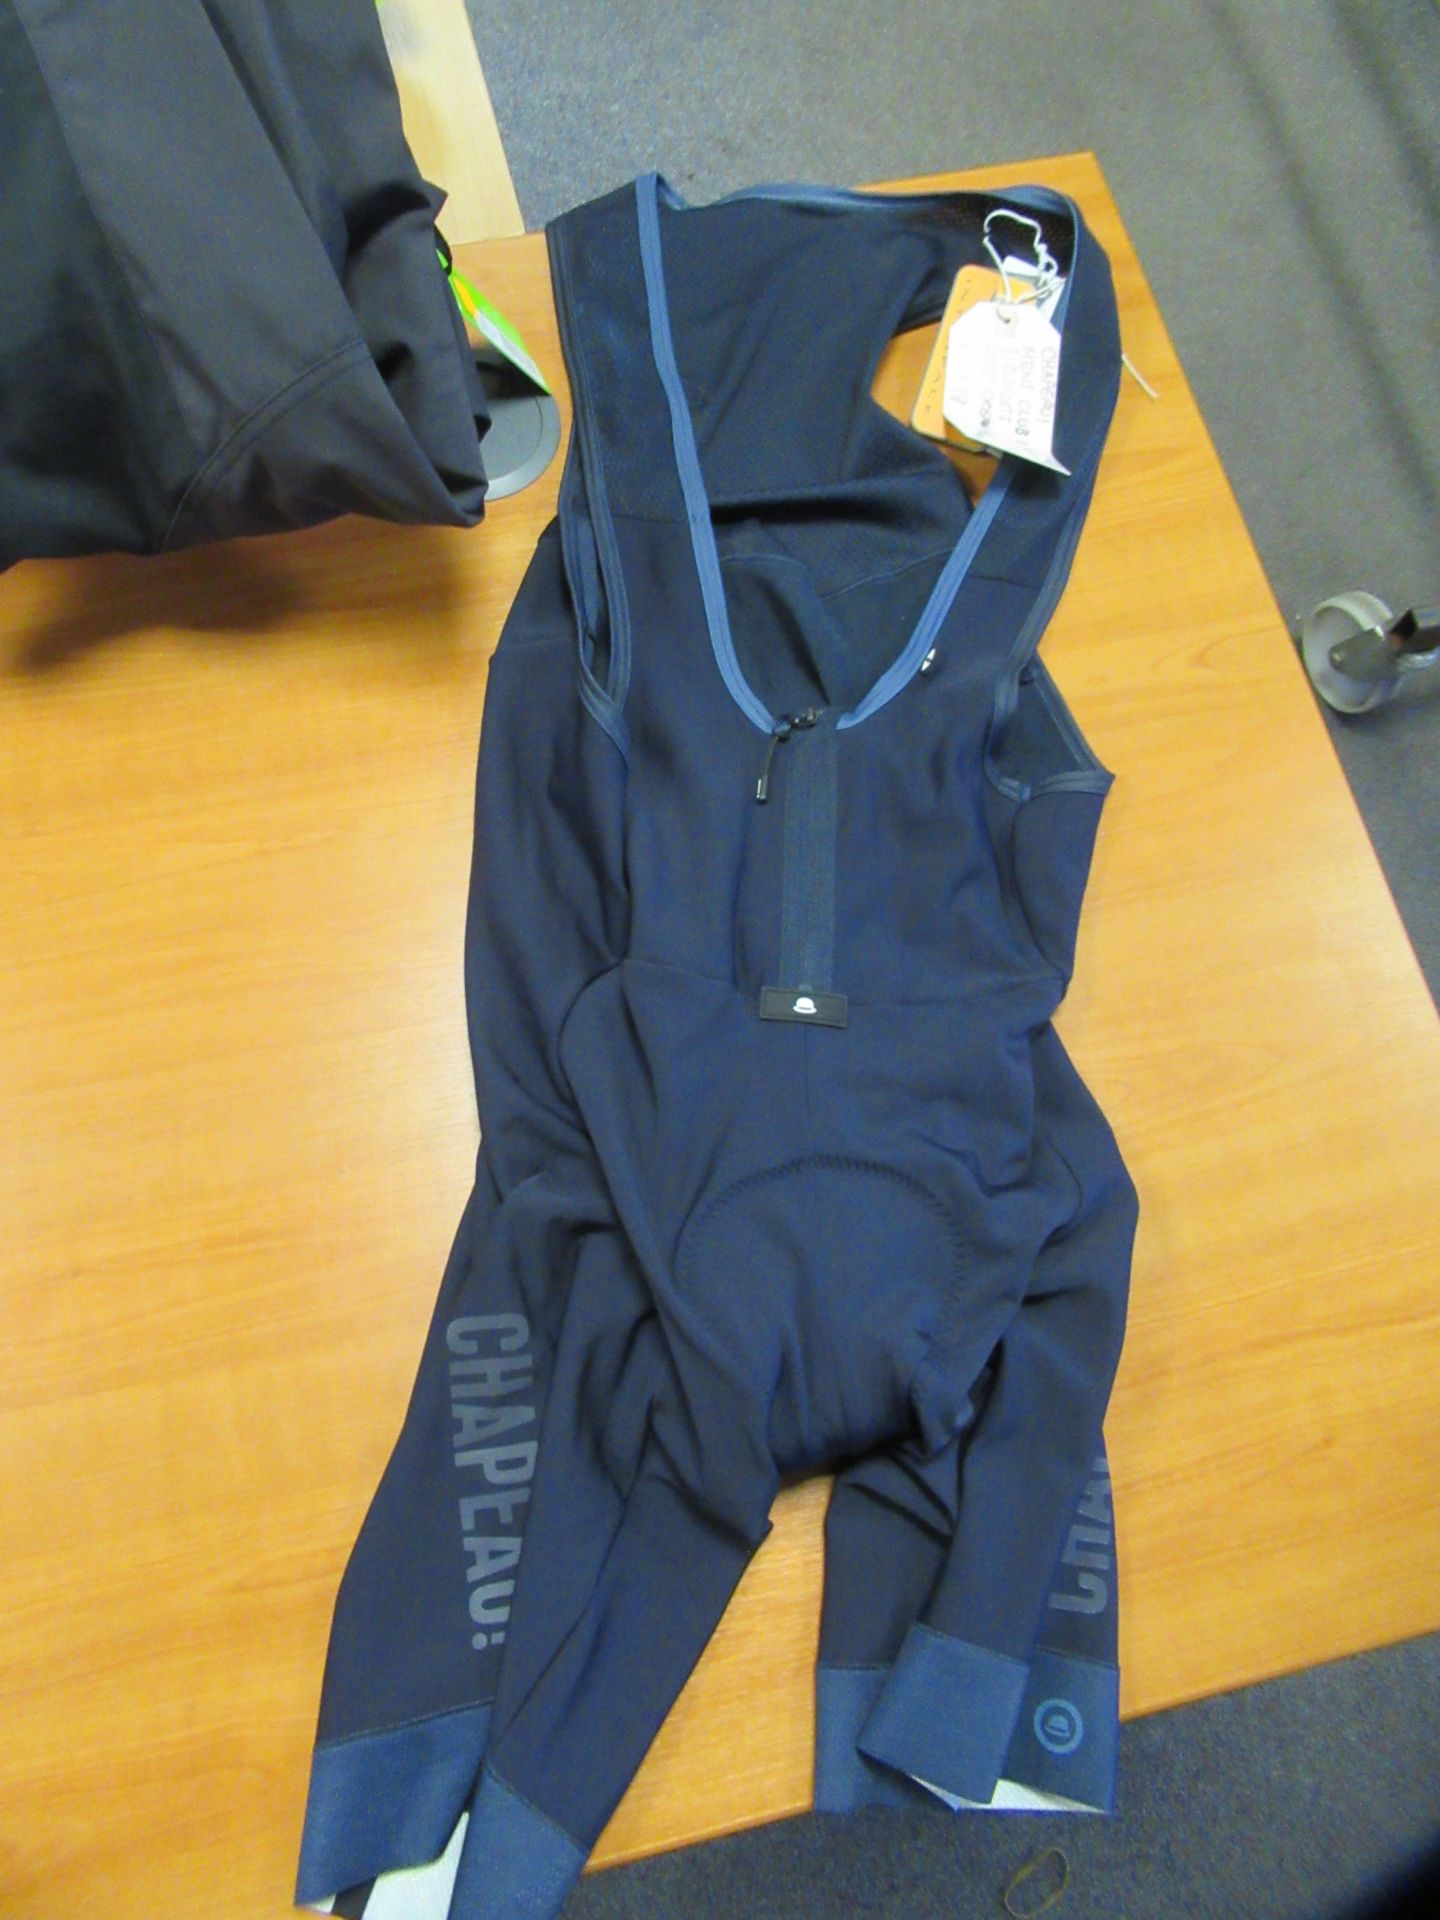 XXL Male Cycling Clothes - Image 4 of 4